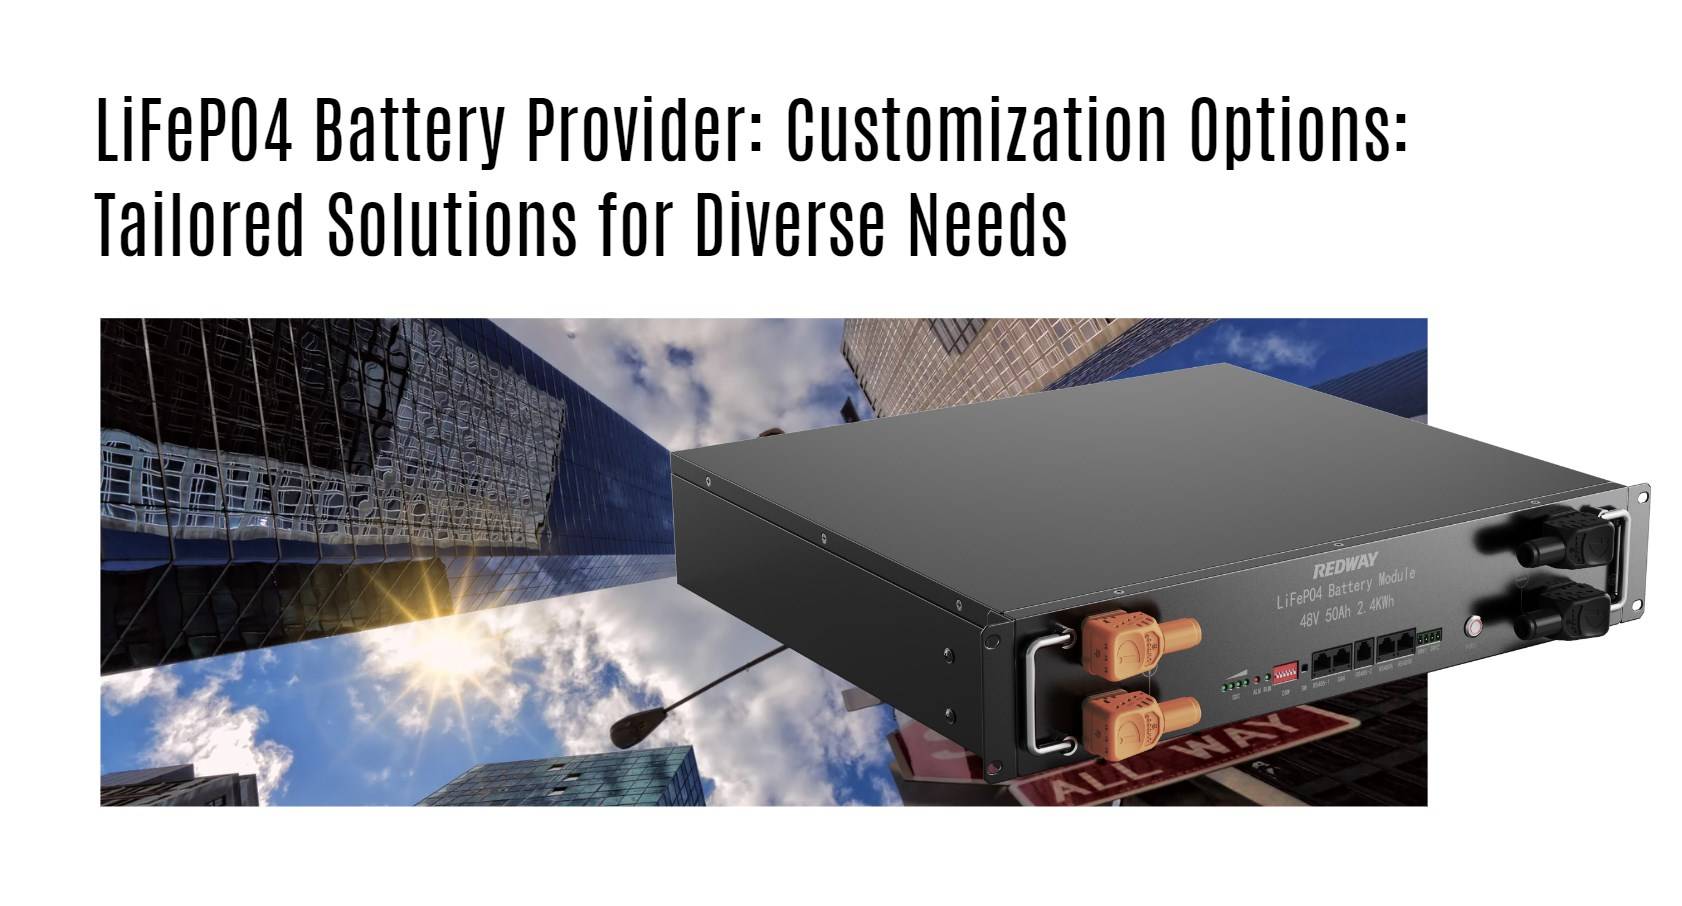 LiFePO4 Battery Provider: Customization Options: Tailored Solutions for Diverse Needs